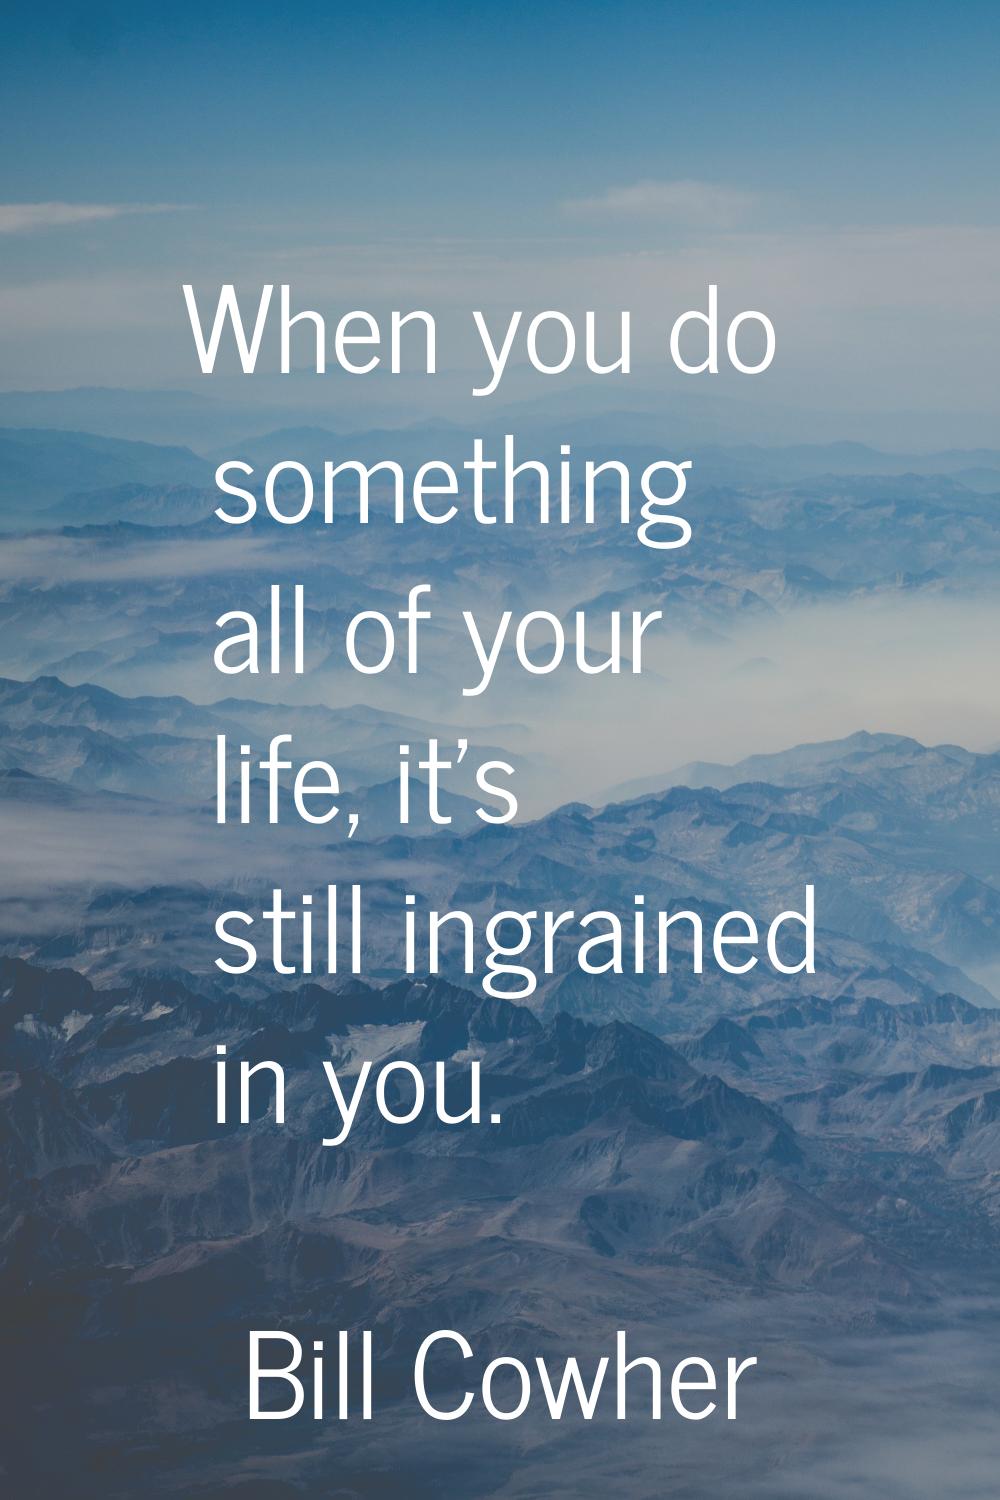 When you do something all of your life, it's still ingrained in you.